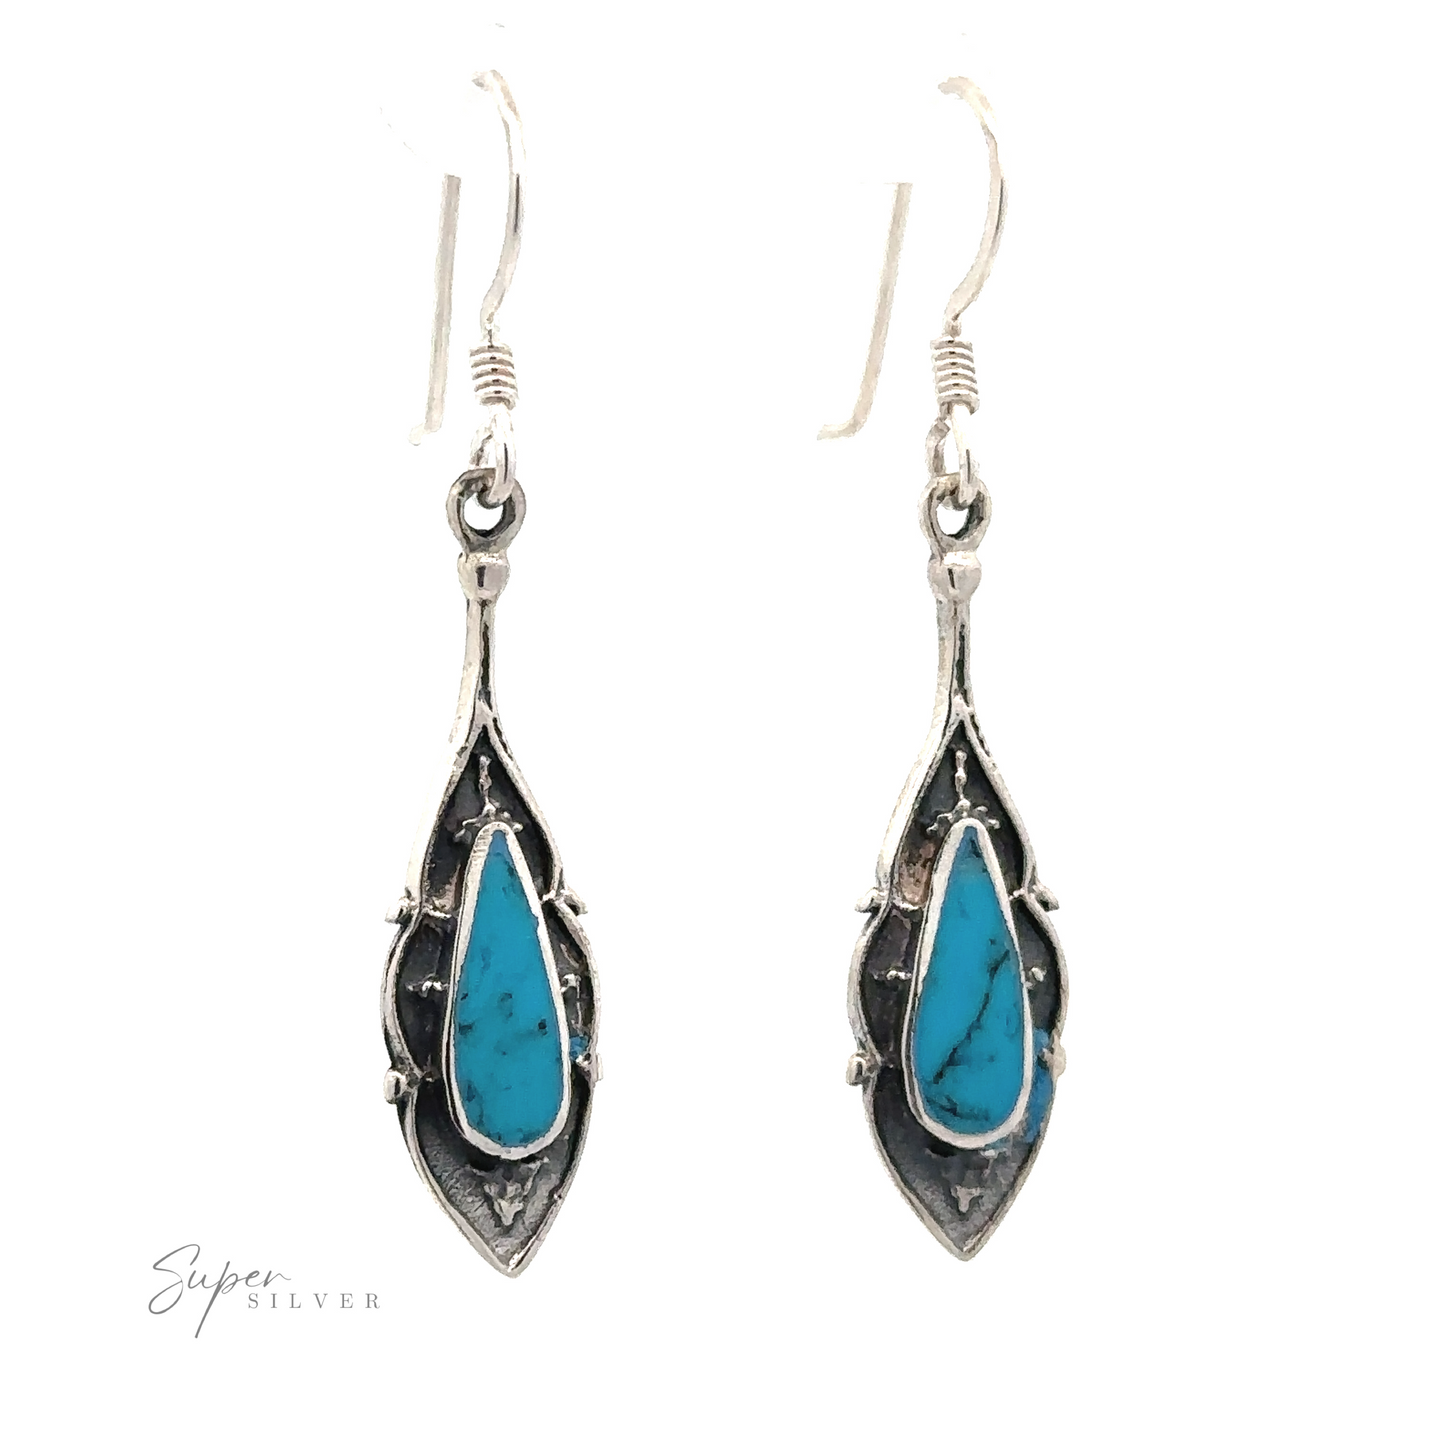 
                  
                    A pair of Teardrop Shape Inlaid Earrings featuring teardrop-shaped turquoise stones set in an ornamental design with an oxidized finish.
                  
                